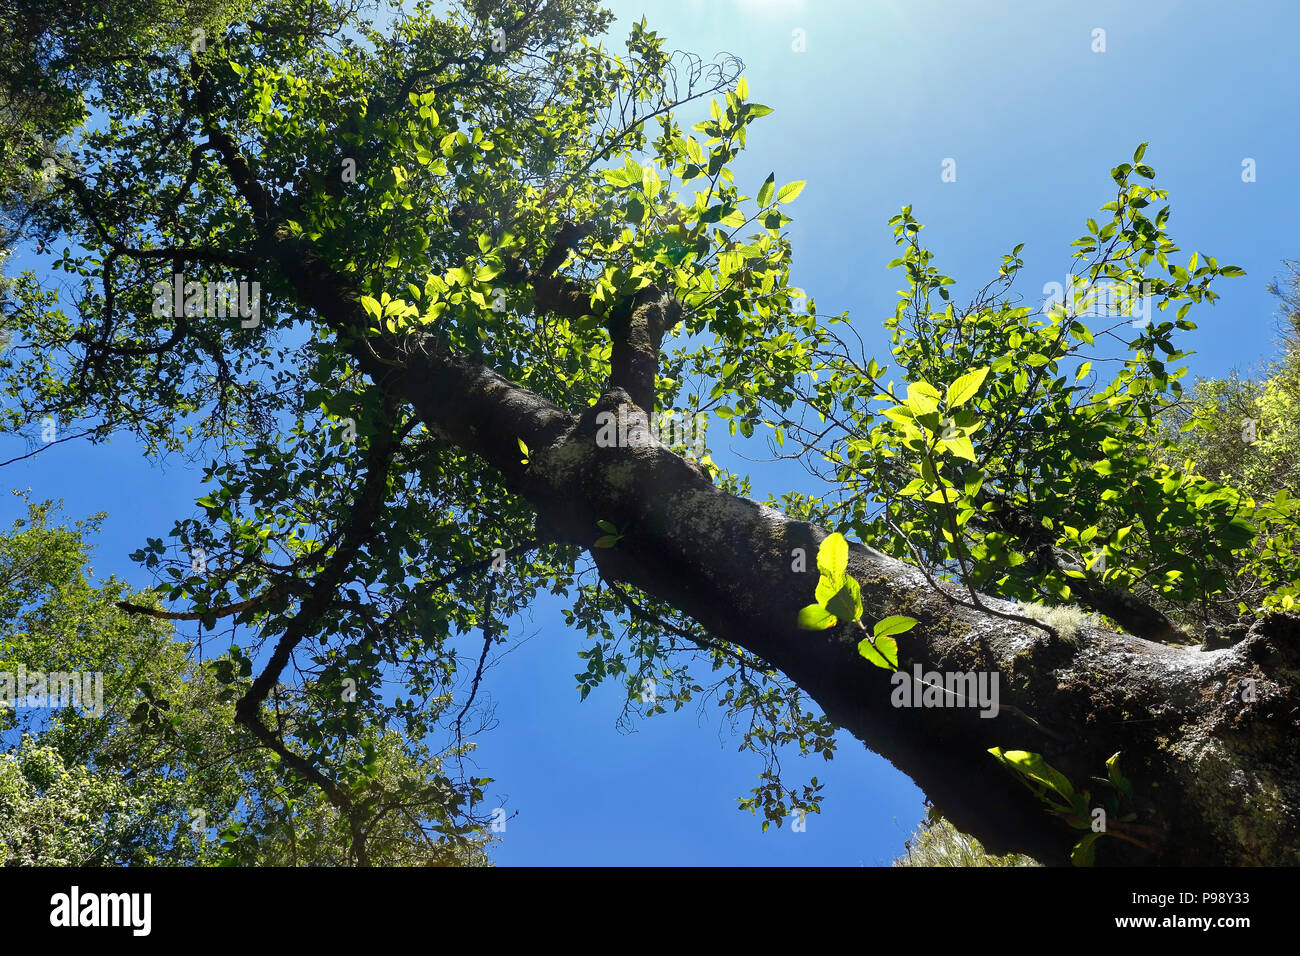 An old aliso tree (Alnus glutinosa) from a low view Stock Photo